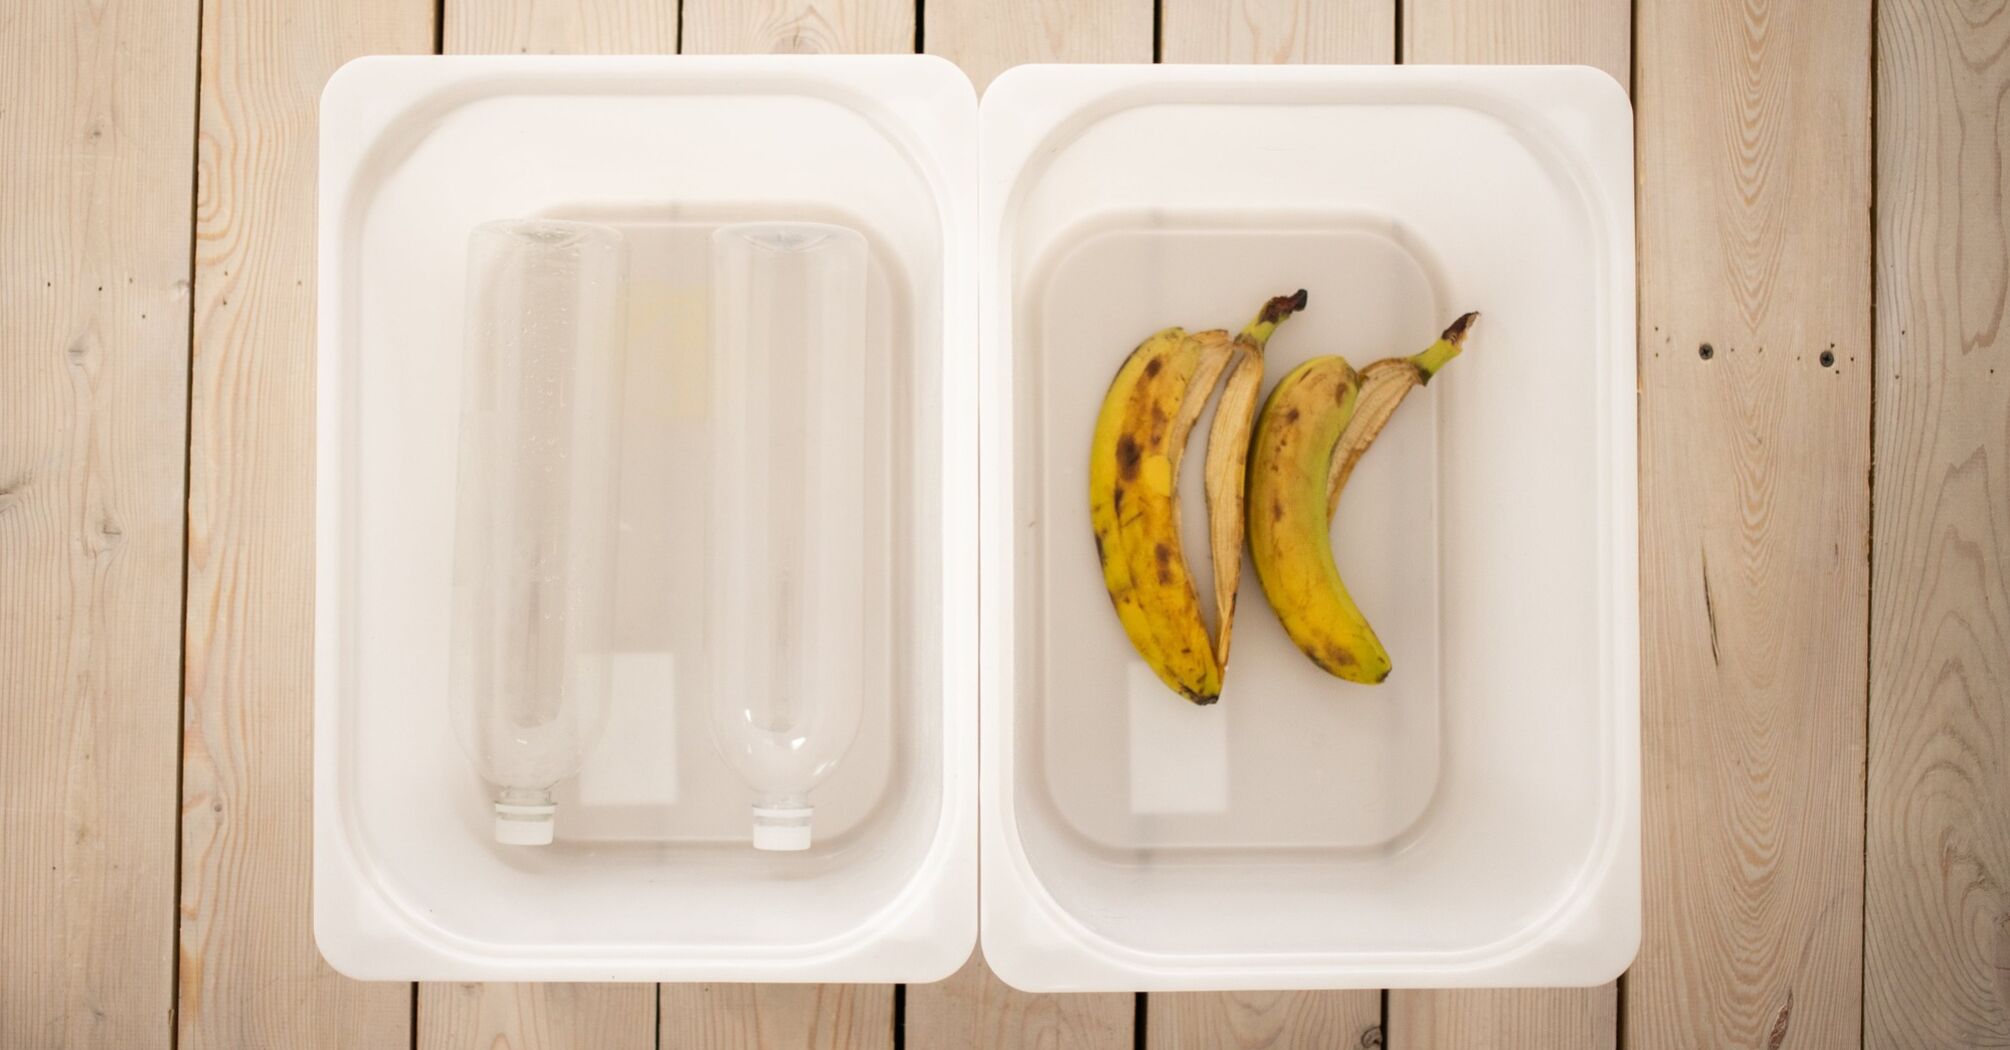 Don't throw away banana peels: we suggest three ways to use them